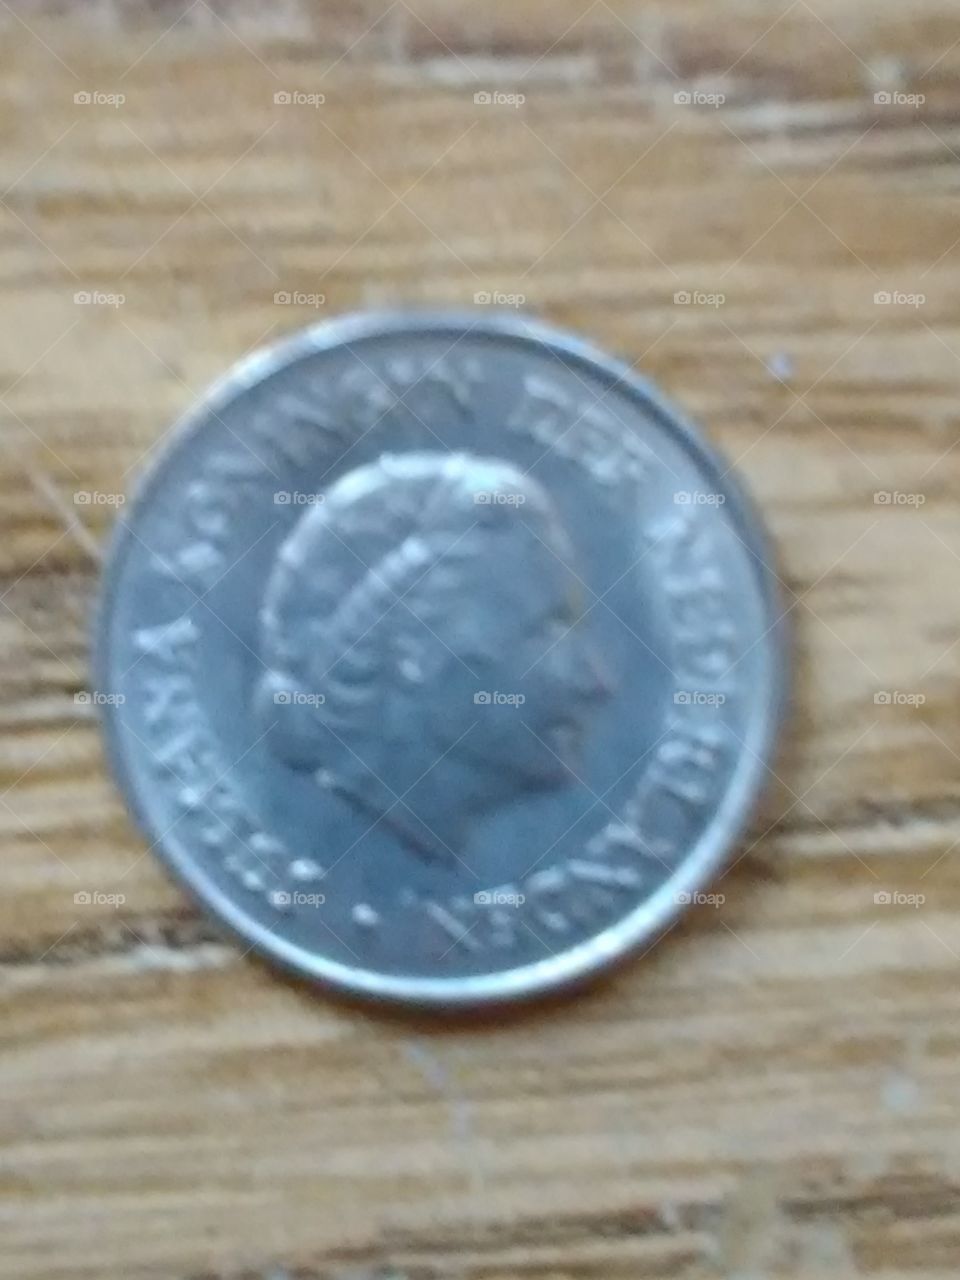 a Dutch 25 cent piece from the Netherlands